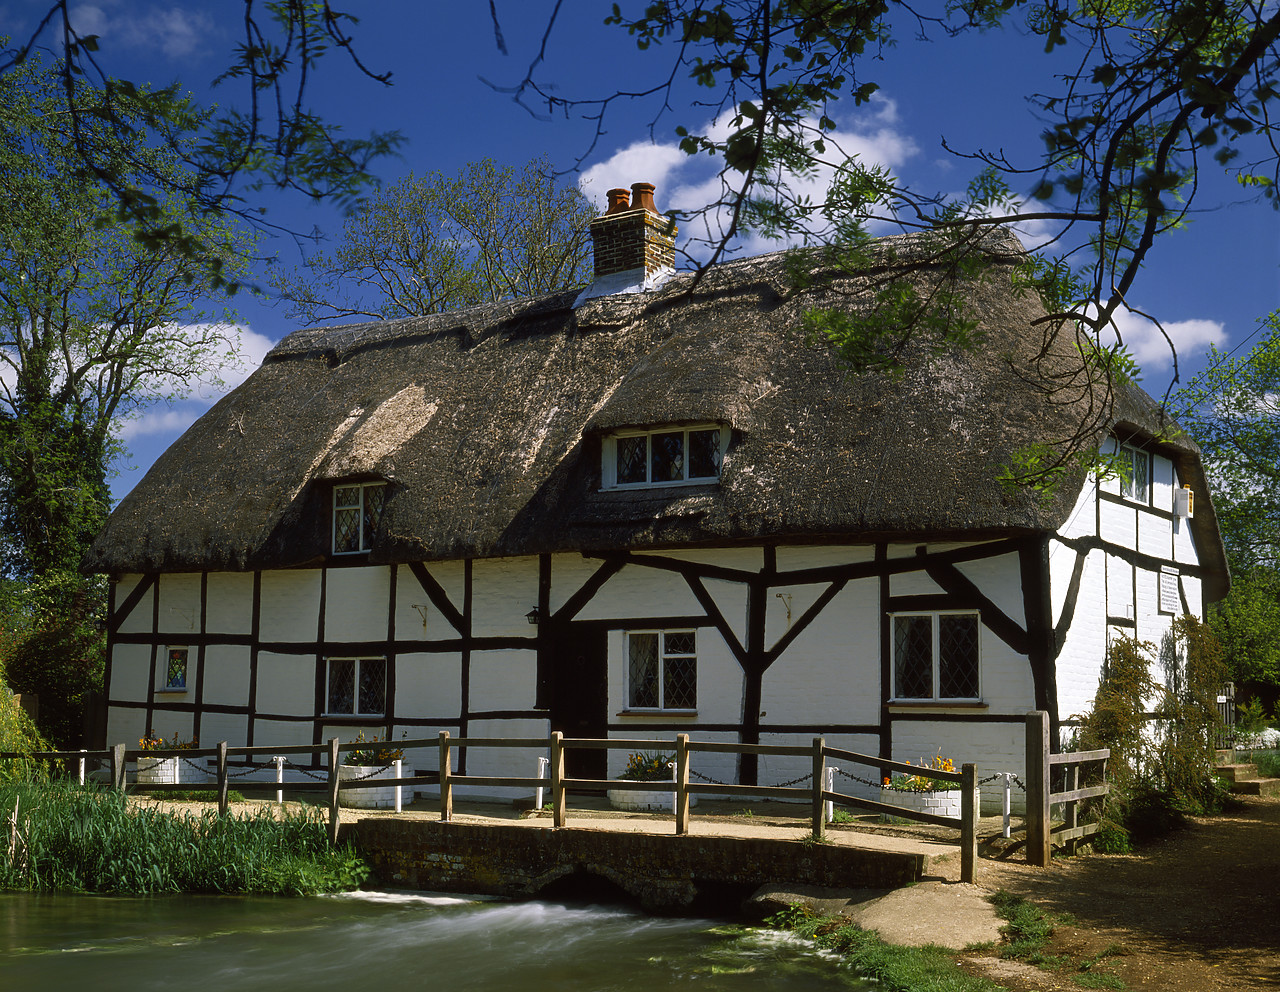 #902879-1 - The Fulling Mill Cottage, New Alresford, Hampshire, England